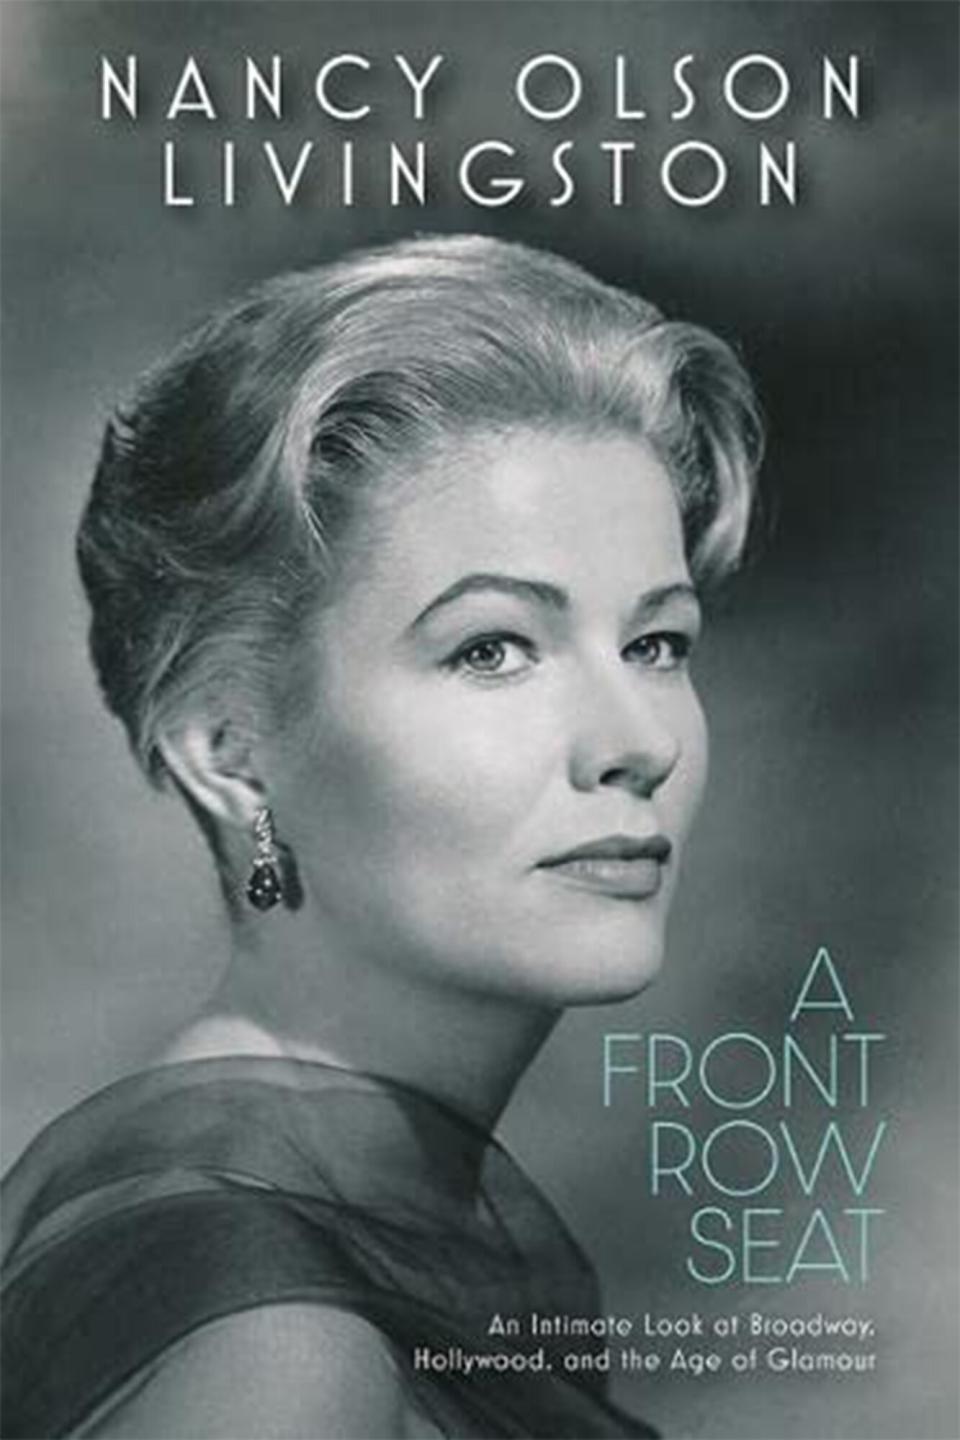 A Front Row Seat: An Intimate Look at Broadway, Hollywood, and the Age of Glamour by Nancy Olson Livingston